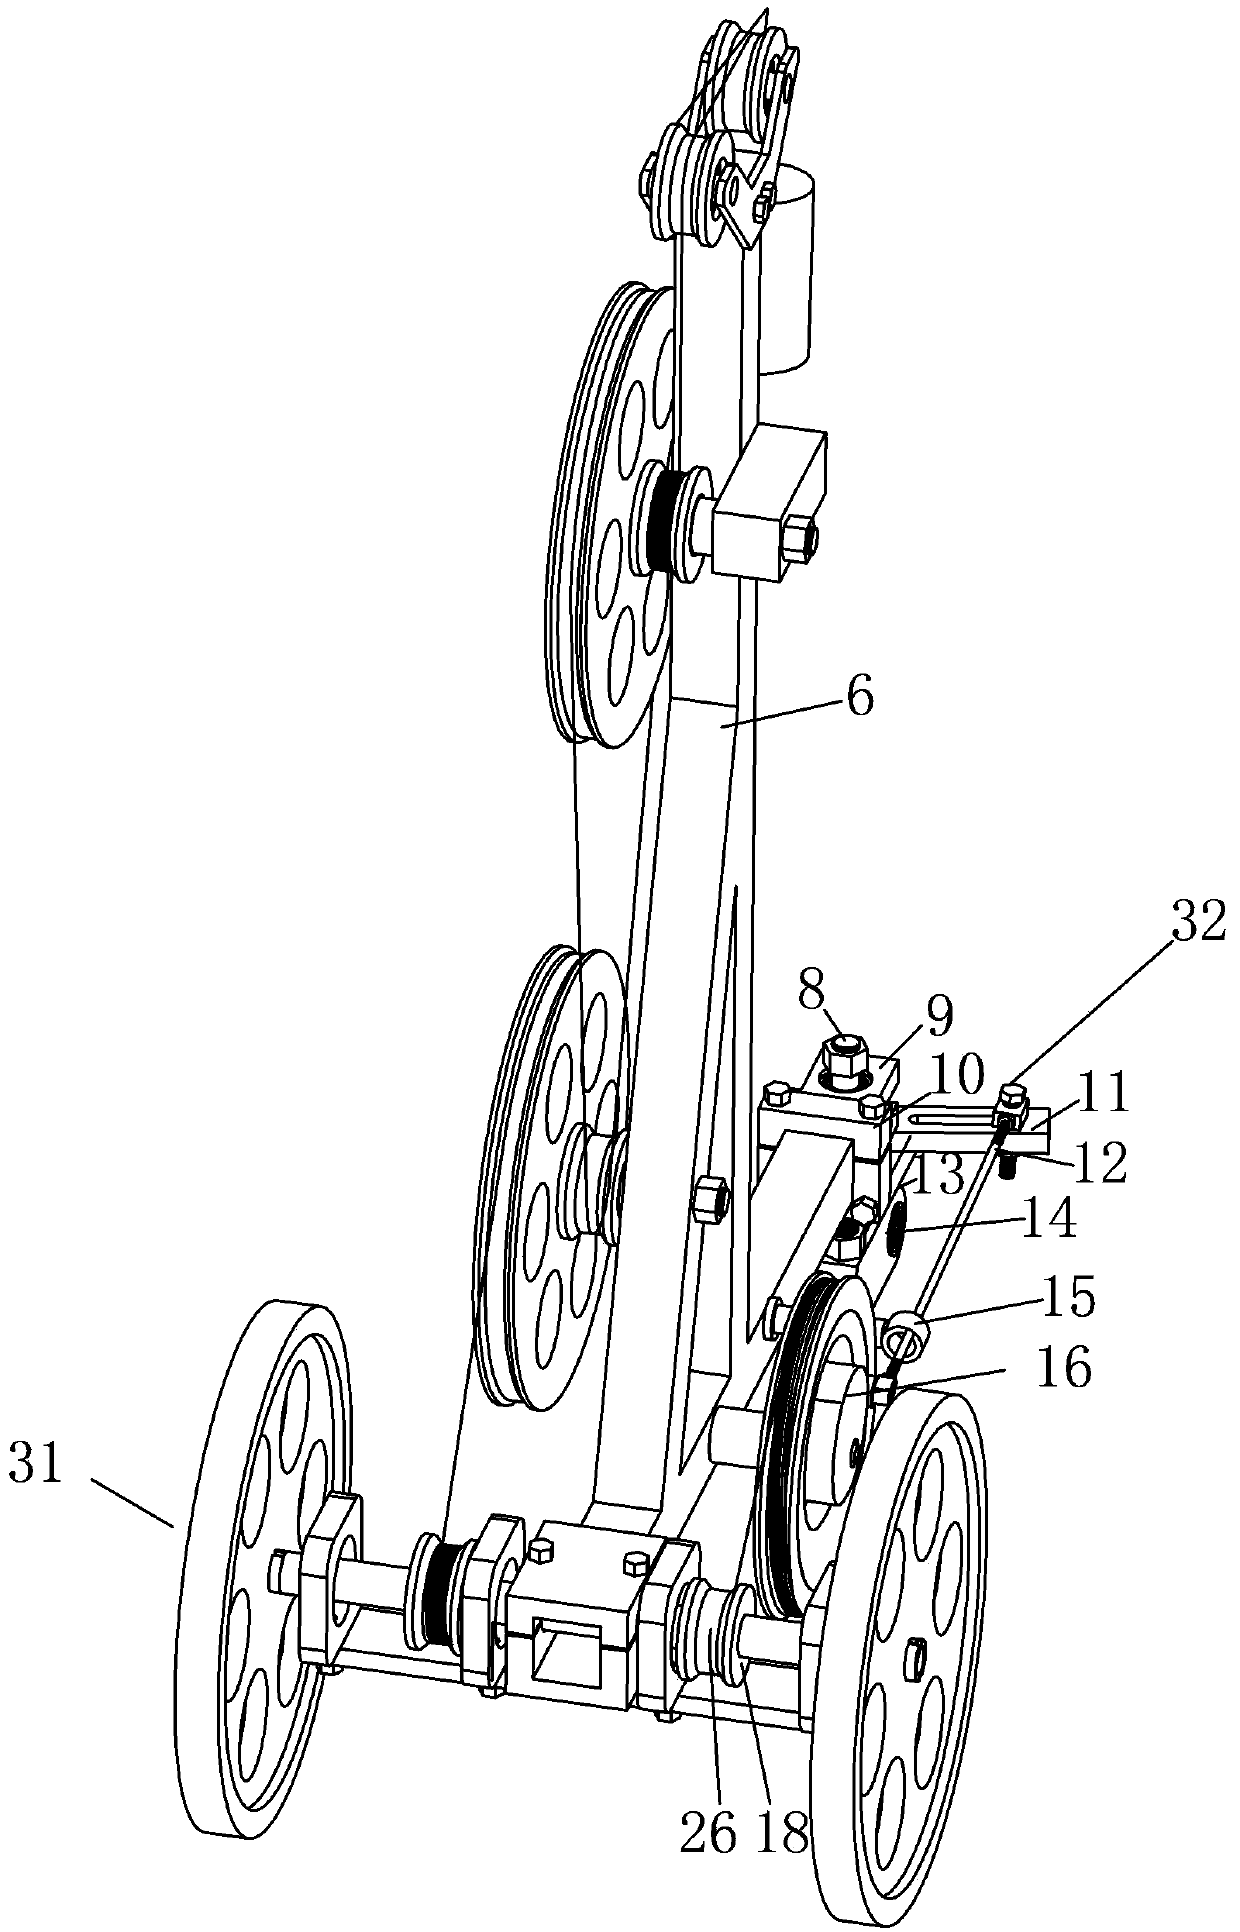 Front wheel steering mechanism of steerable three-wheel carbon-free trolley driven through energy conversion